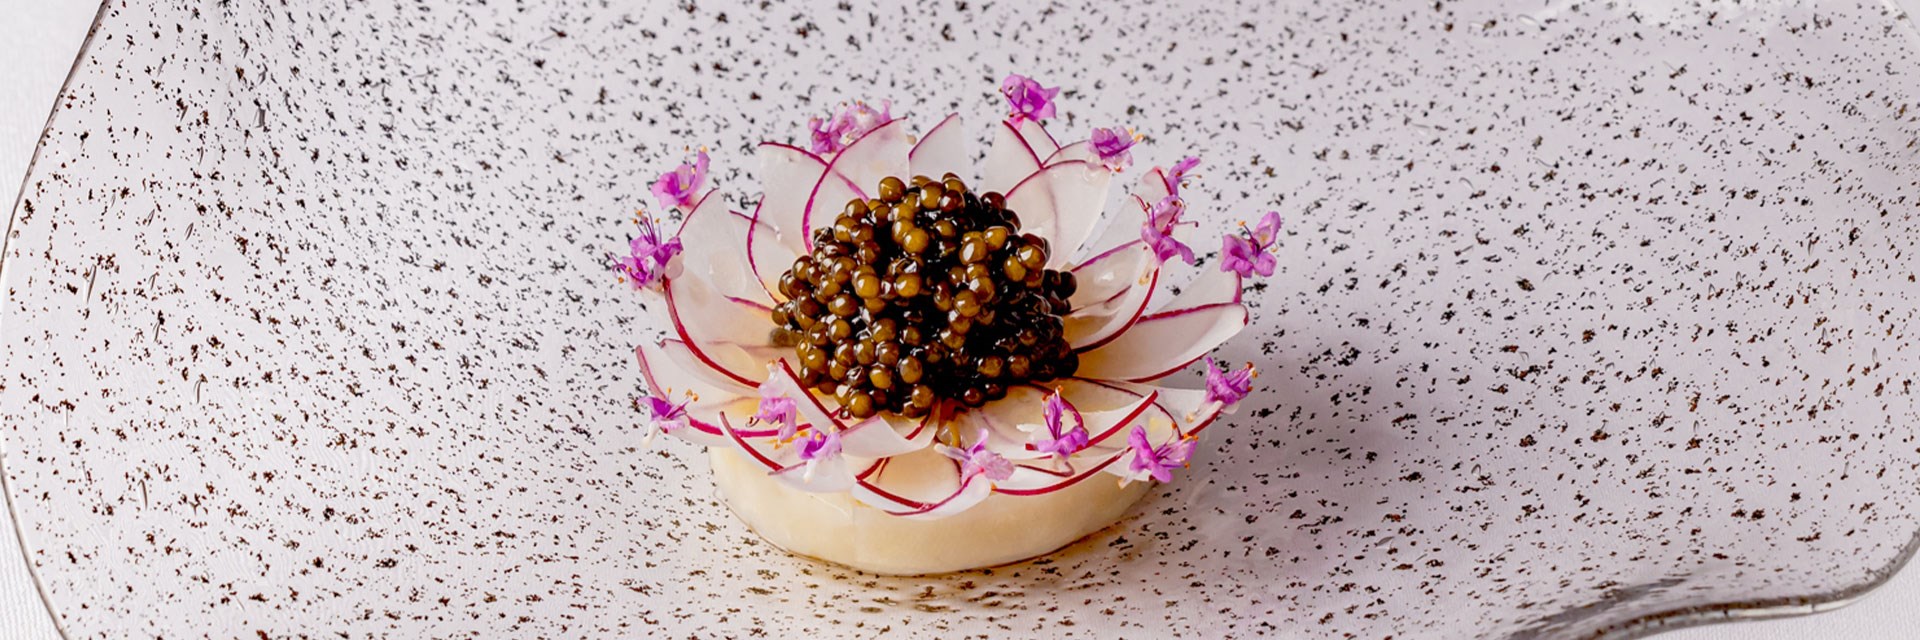 caviar dish with flaked radishes assembled to form a flower